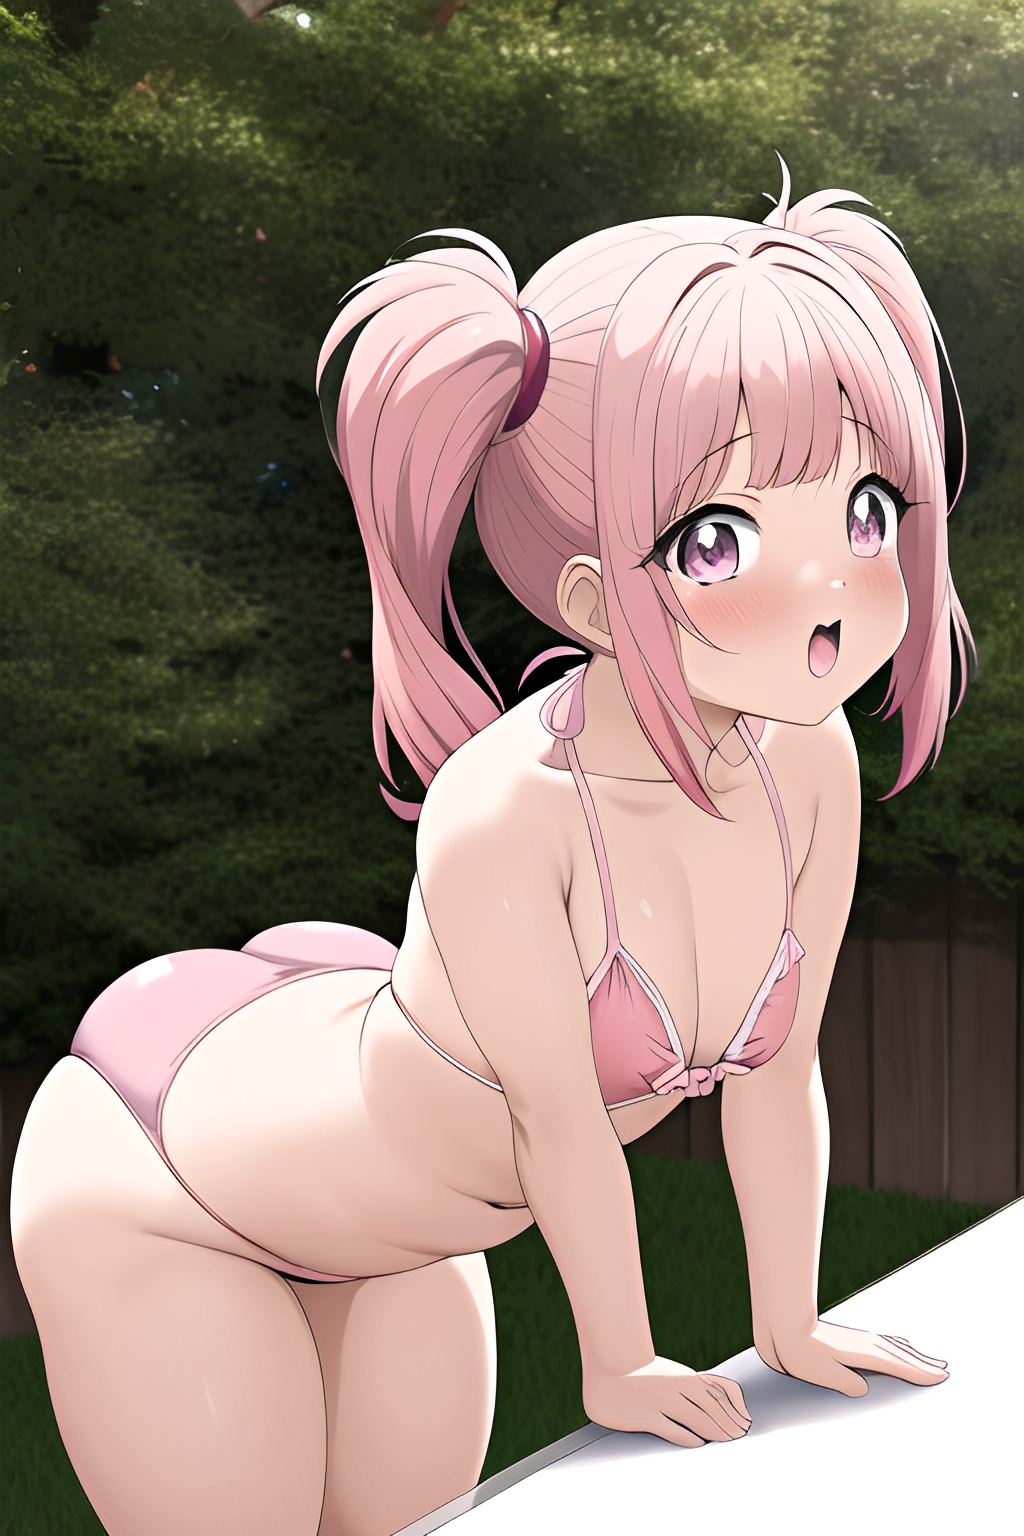 Anime Girl Bent Over Swimsuit - Anime Chubby Small Tits 80s Age Orgasm Face Pink Hair Pigtails Hair Style  Light Skin Soft Anime Oasis Front View Bending Over Bikini - AI Hentai